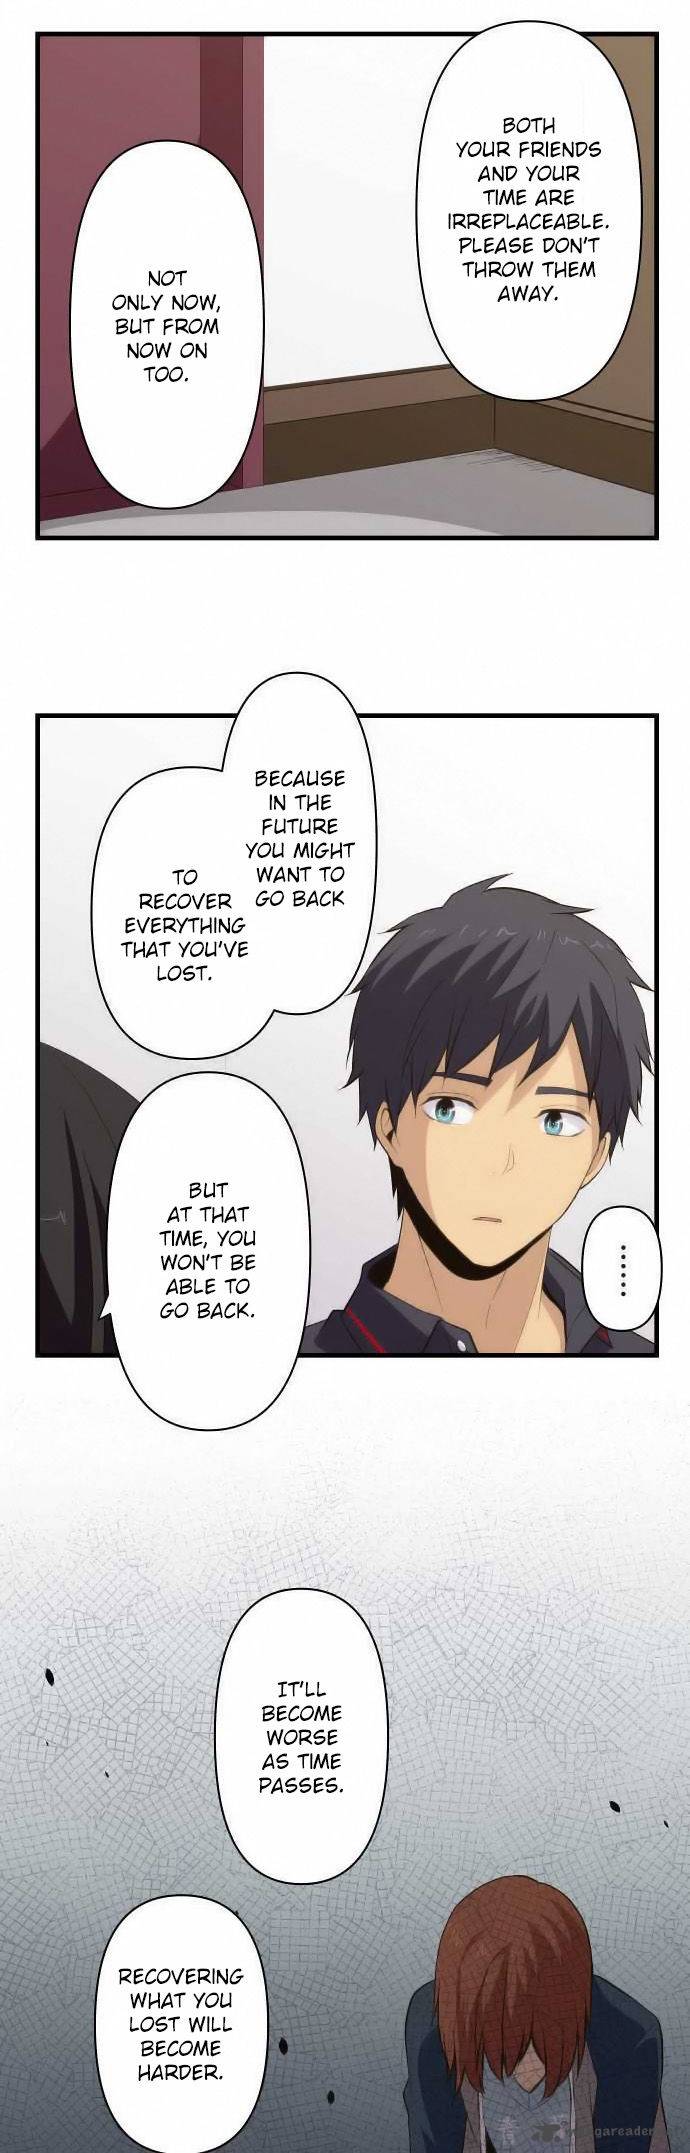 Relife 81 5